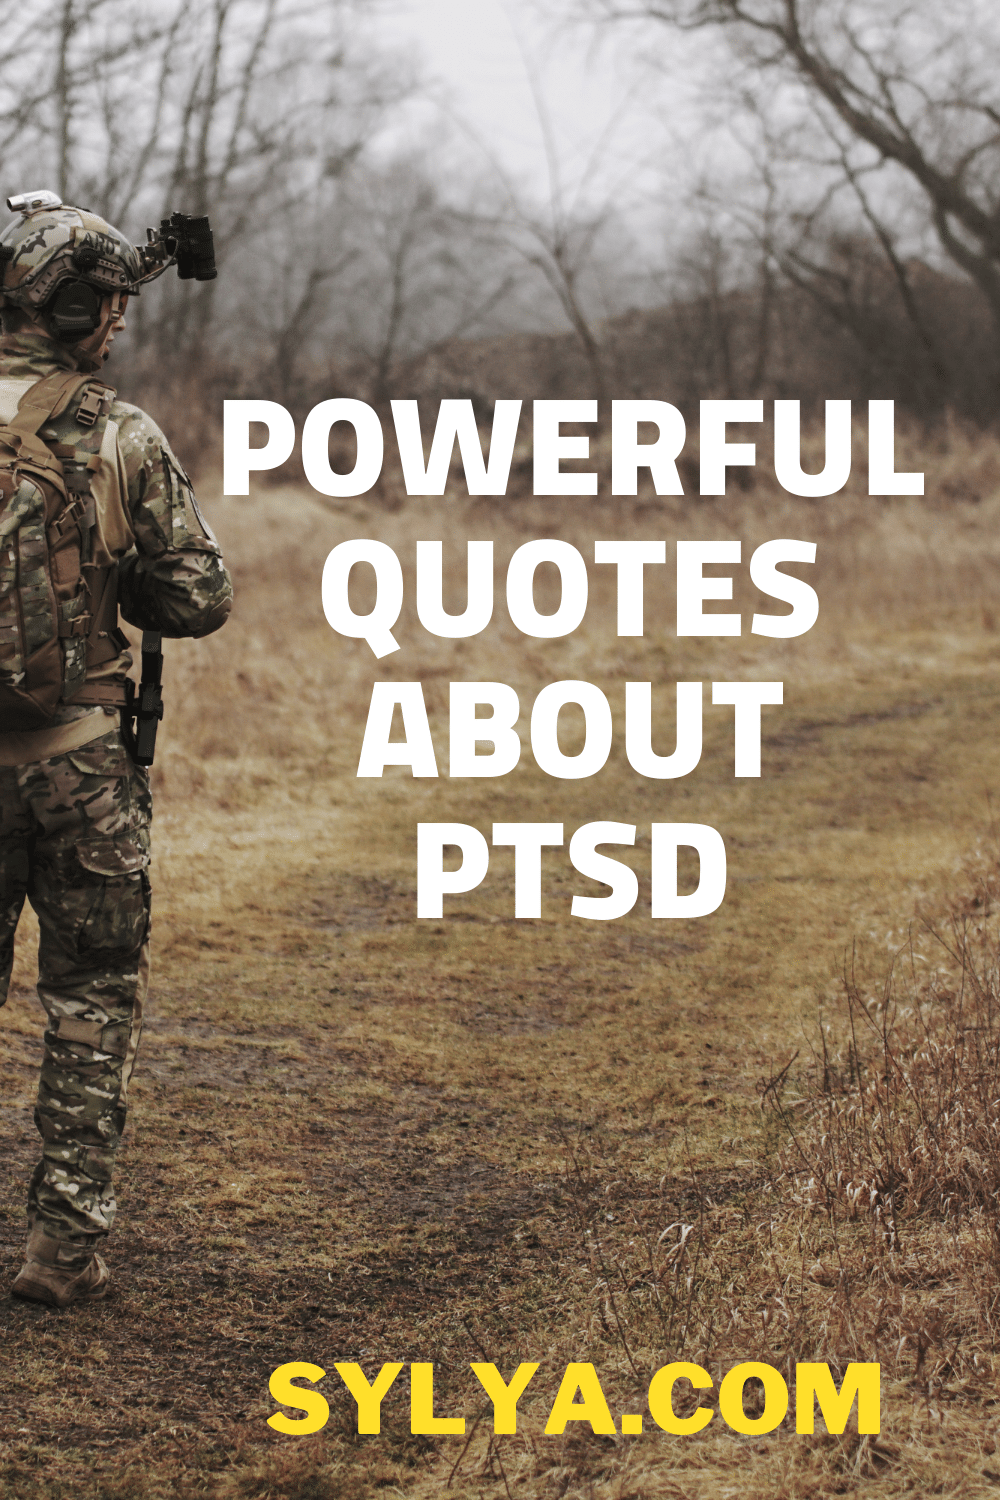 Powerful quotes about PTSD